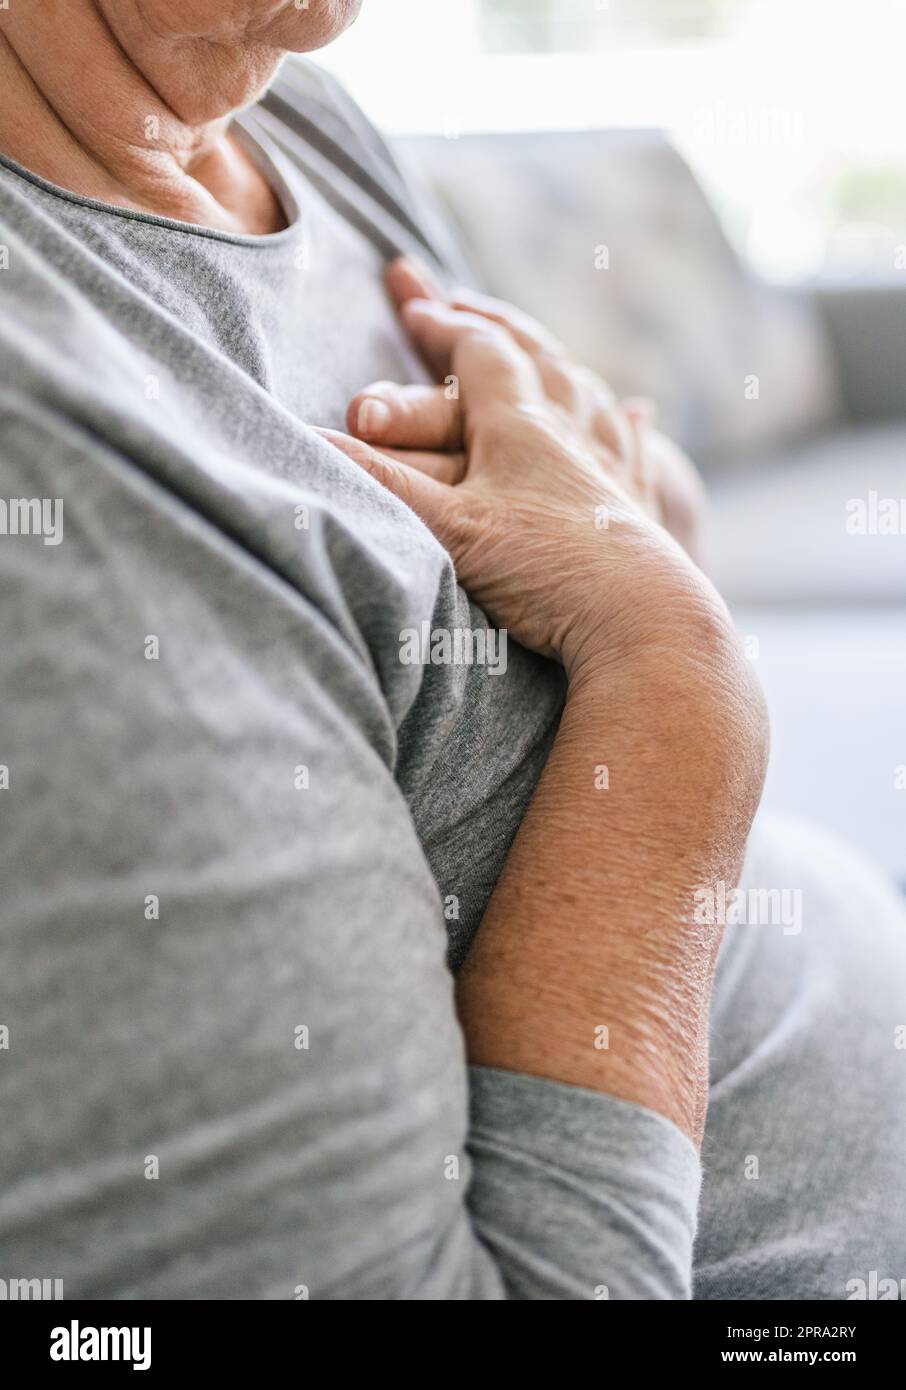 Elderly woman with heart pain holding her chest Stock Photo